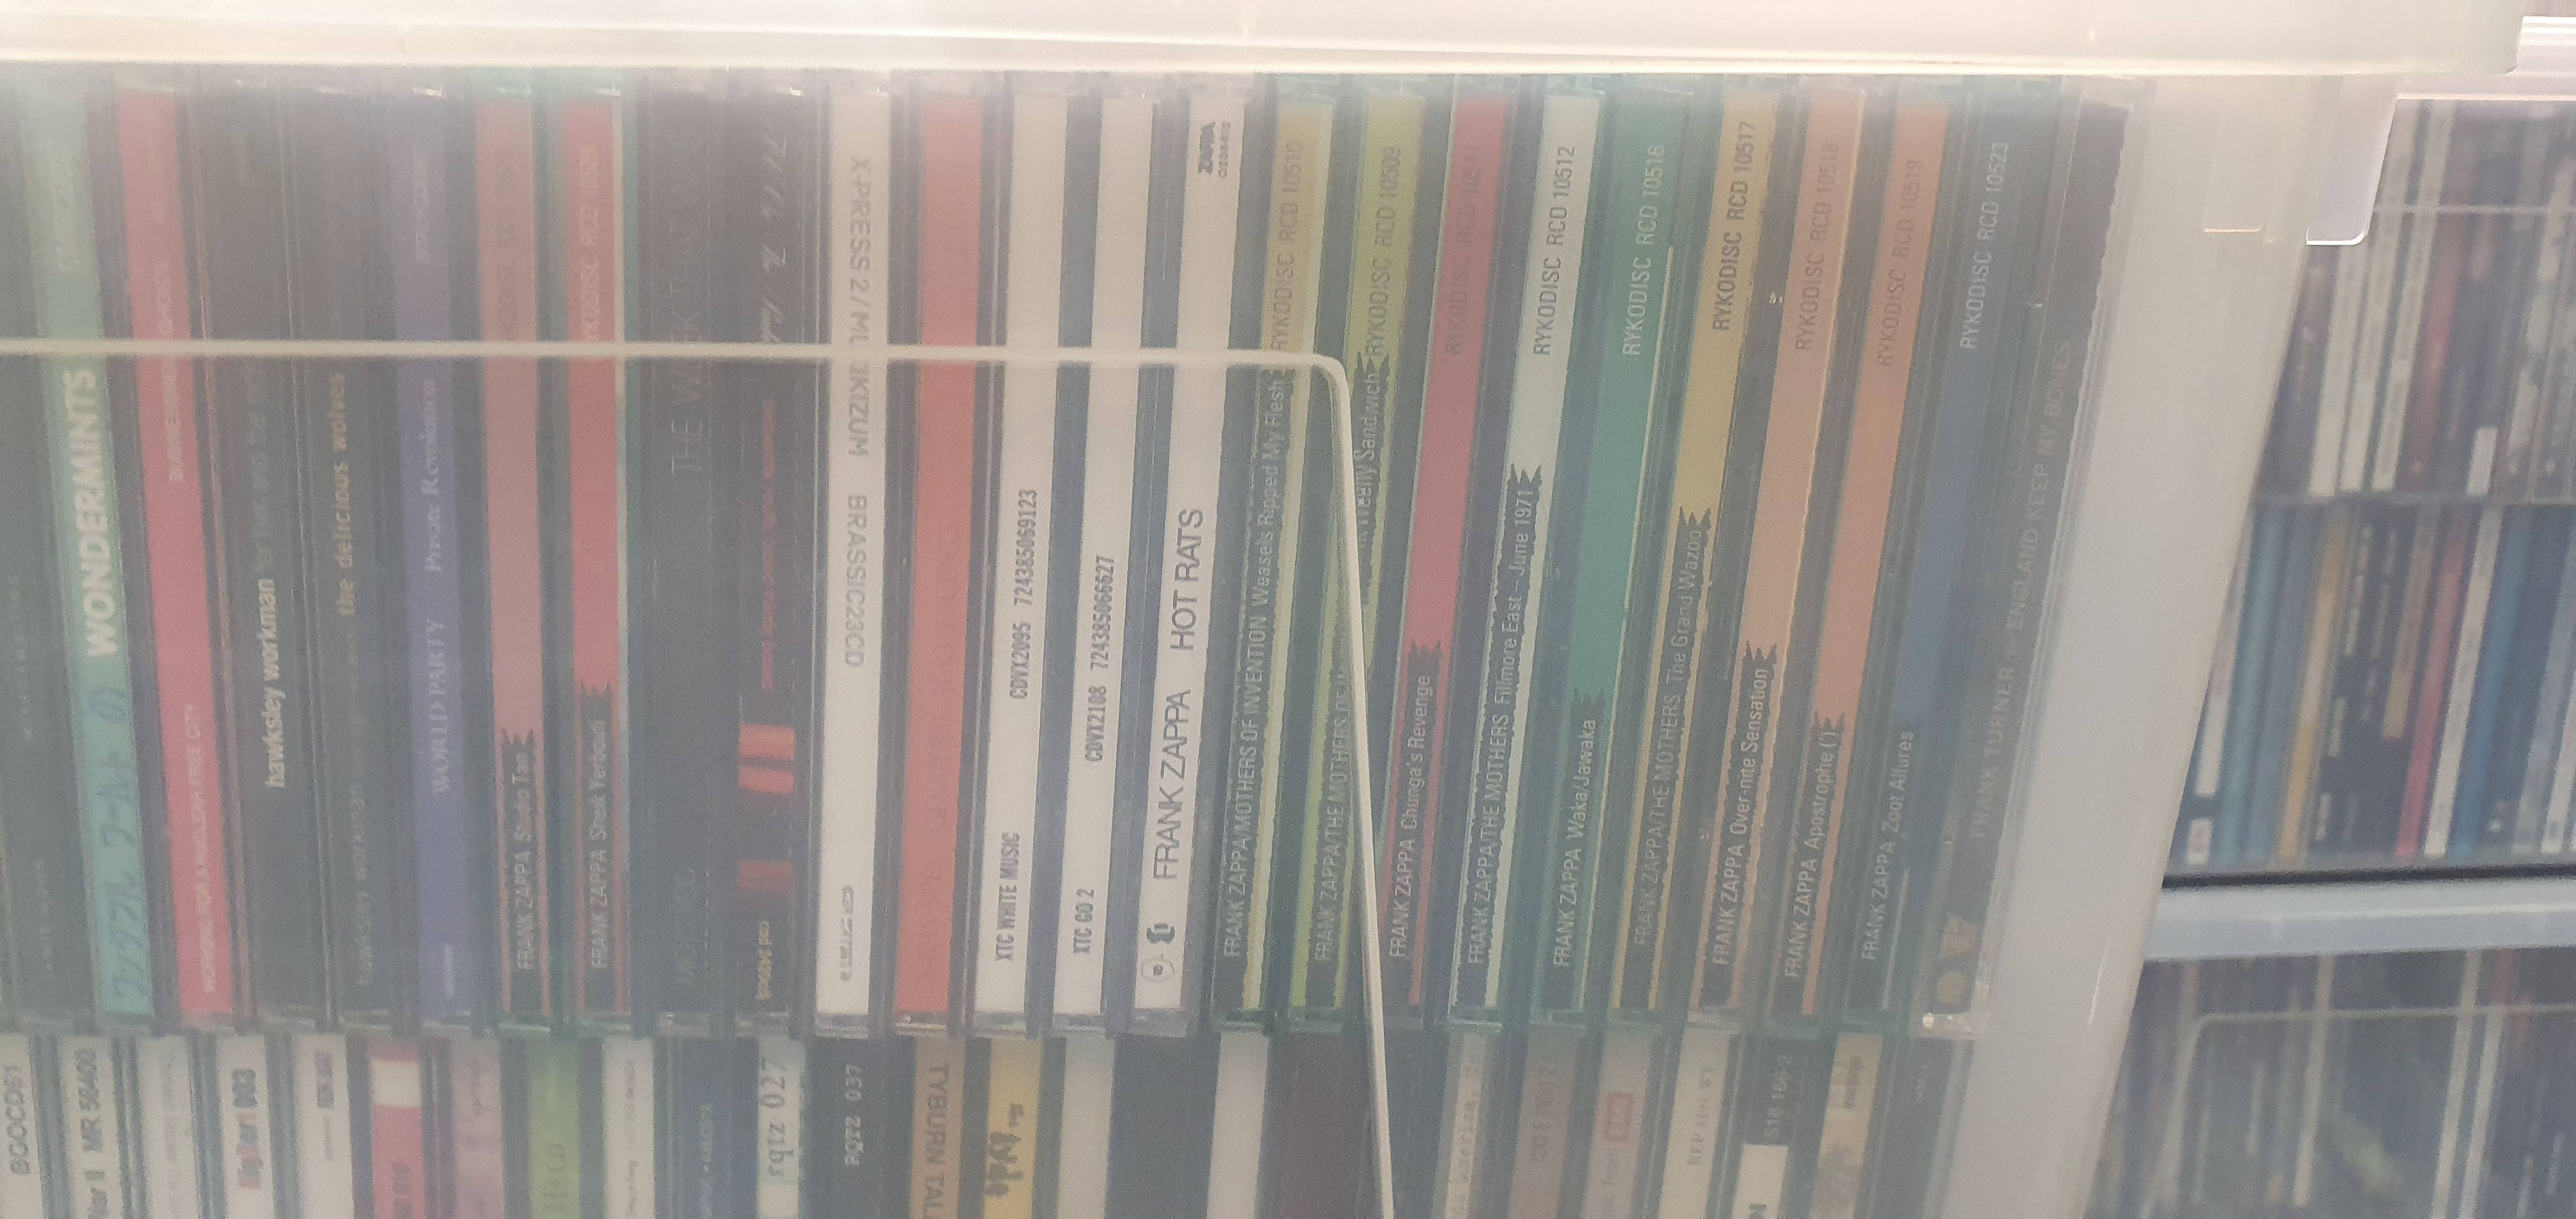 LARGE COLLECTION OF APPROXIMATELY 200 MUSIC CD'S - Image 7 of 9